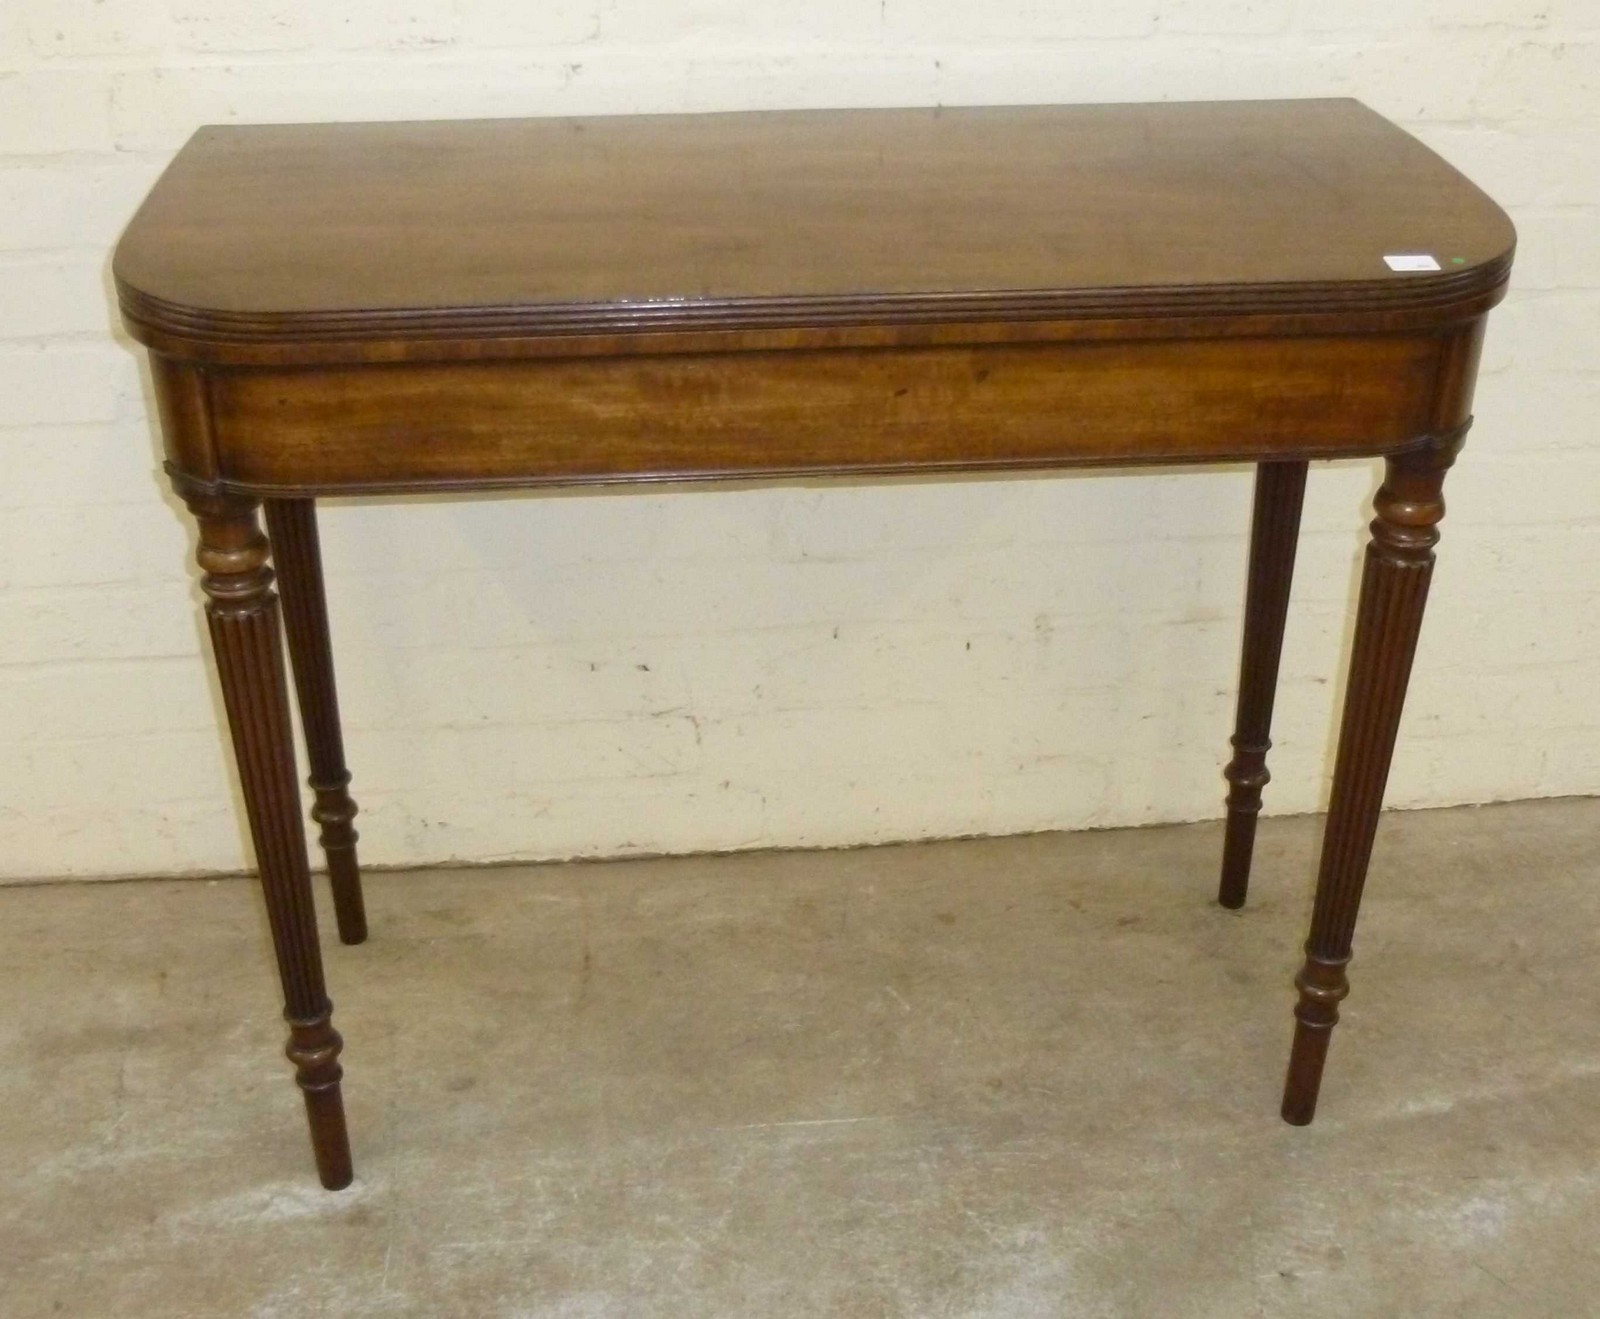 Good quality mahogany fold over card table with tapered fluted legs